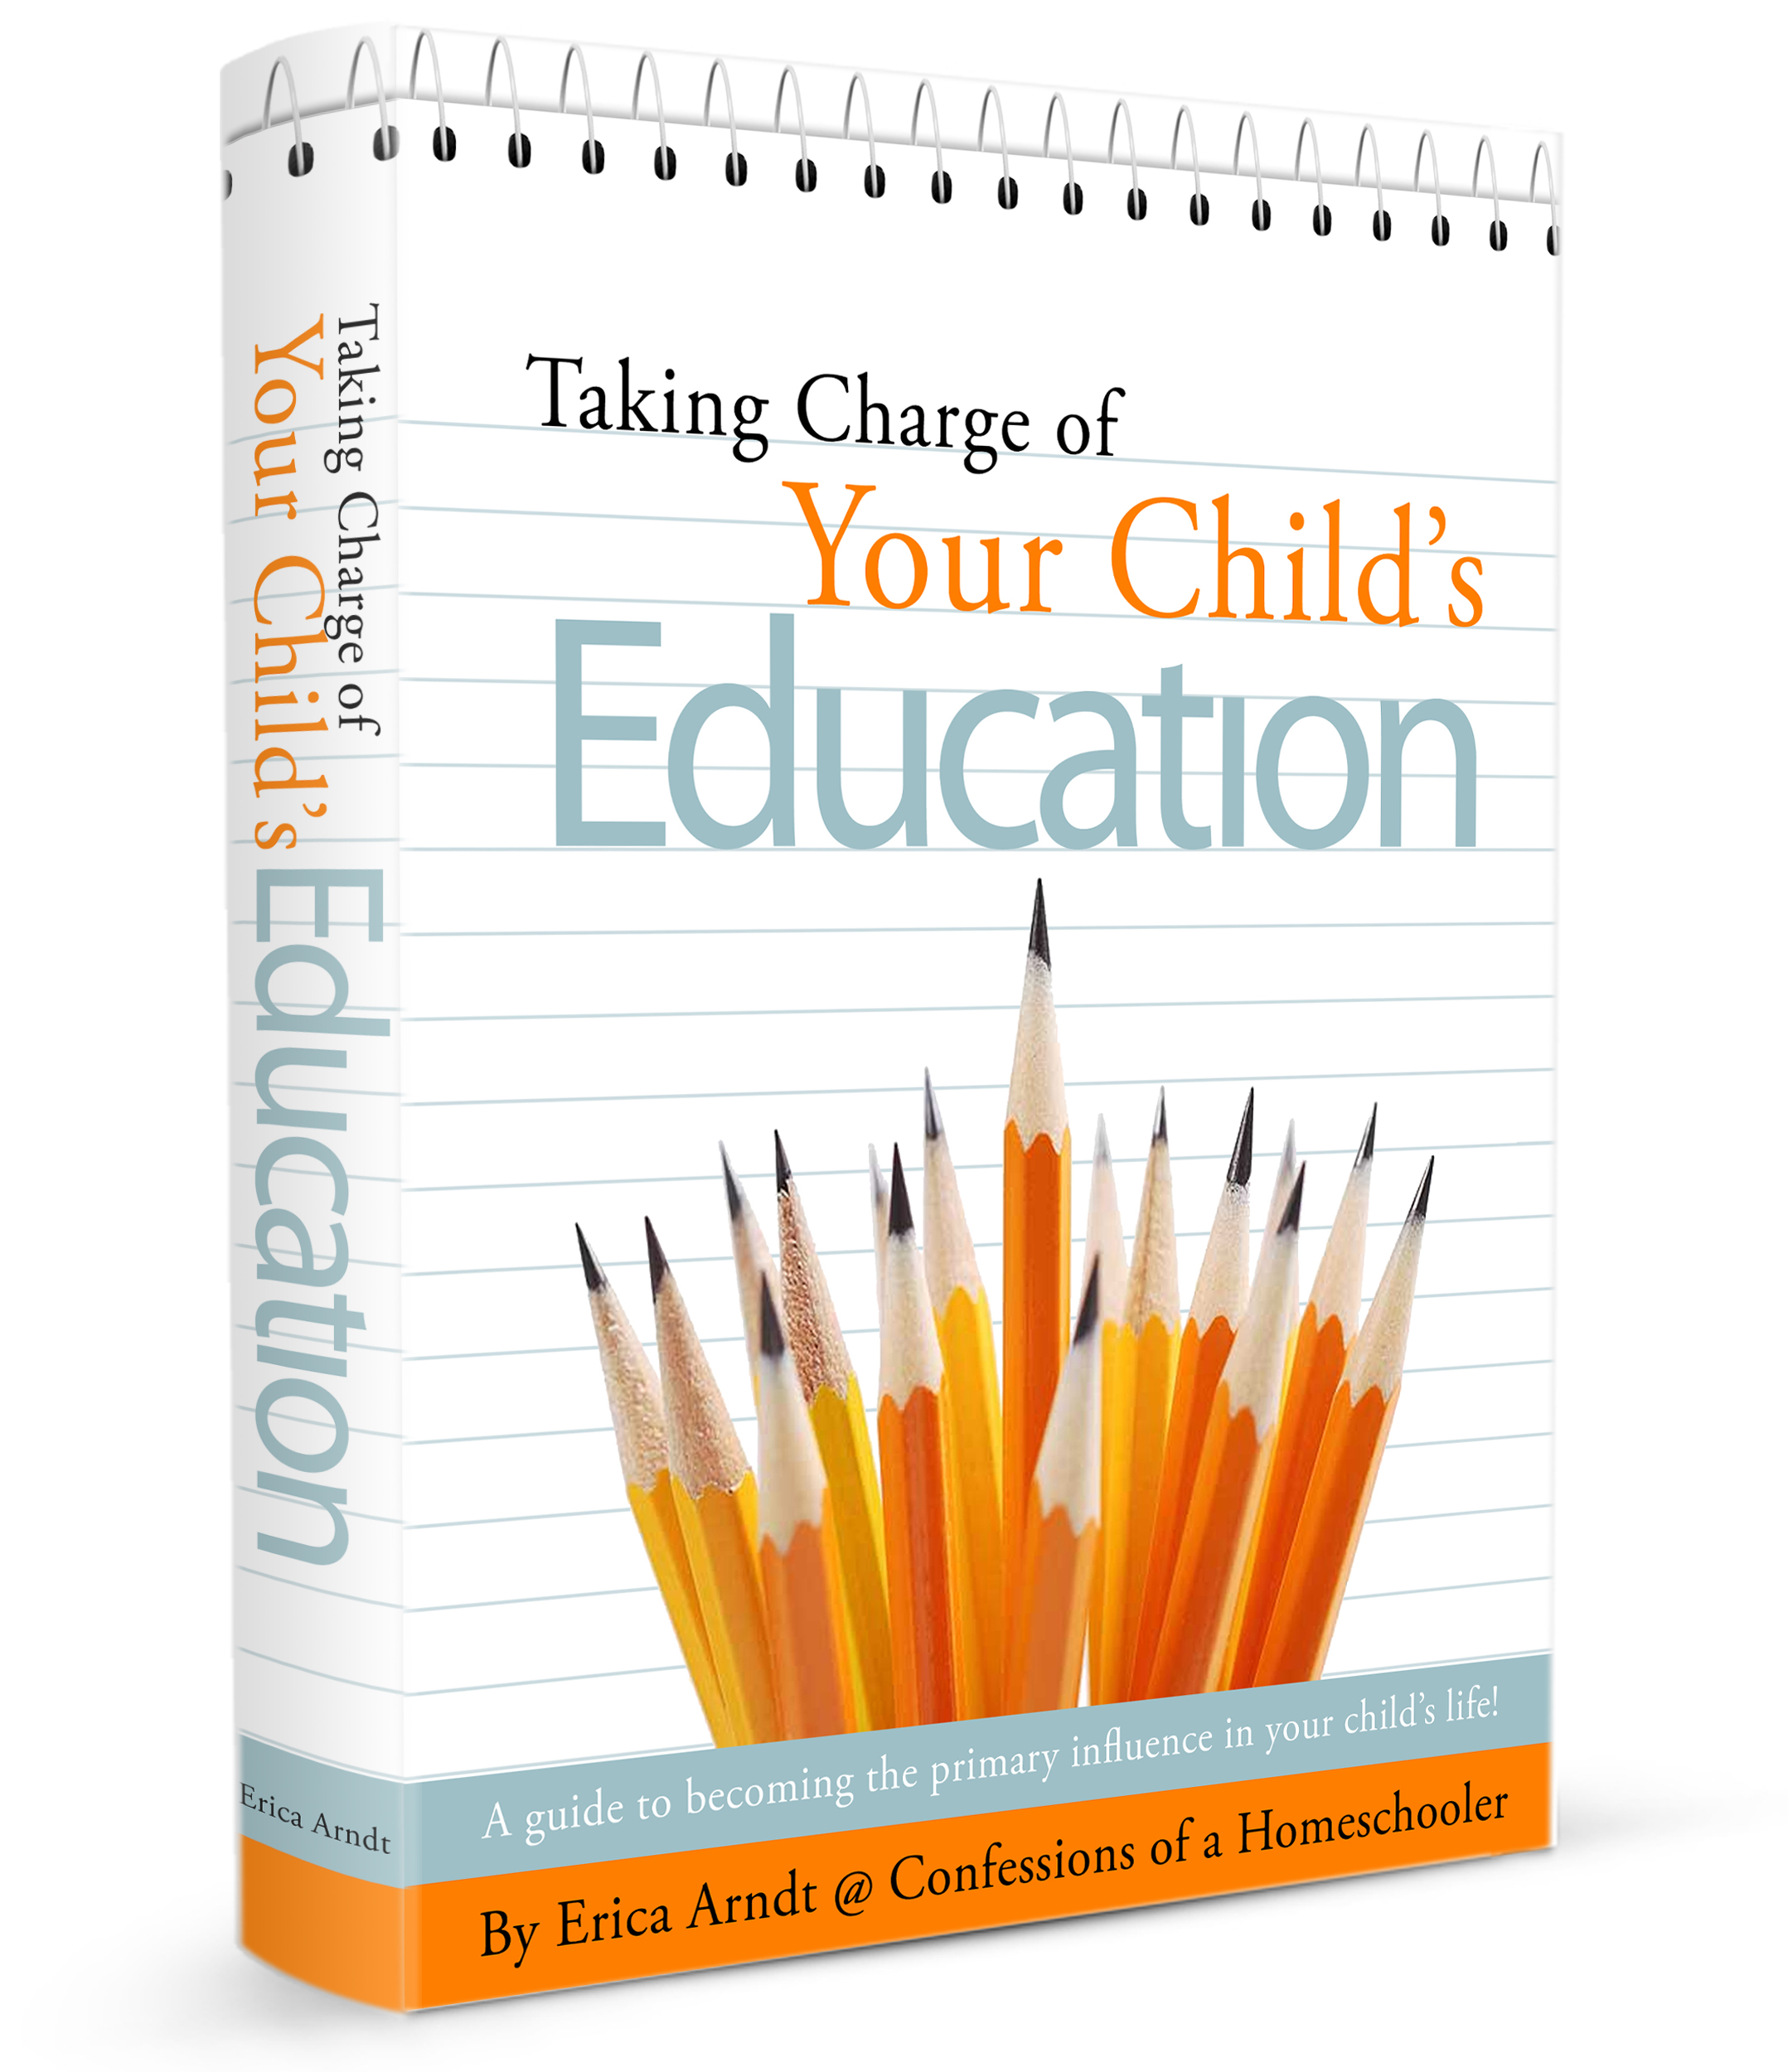 Taking Charge of Your Child's Education